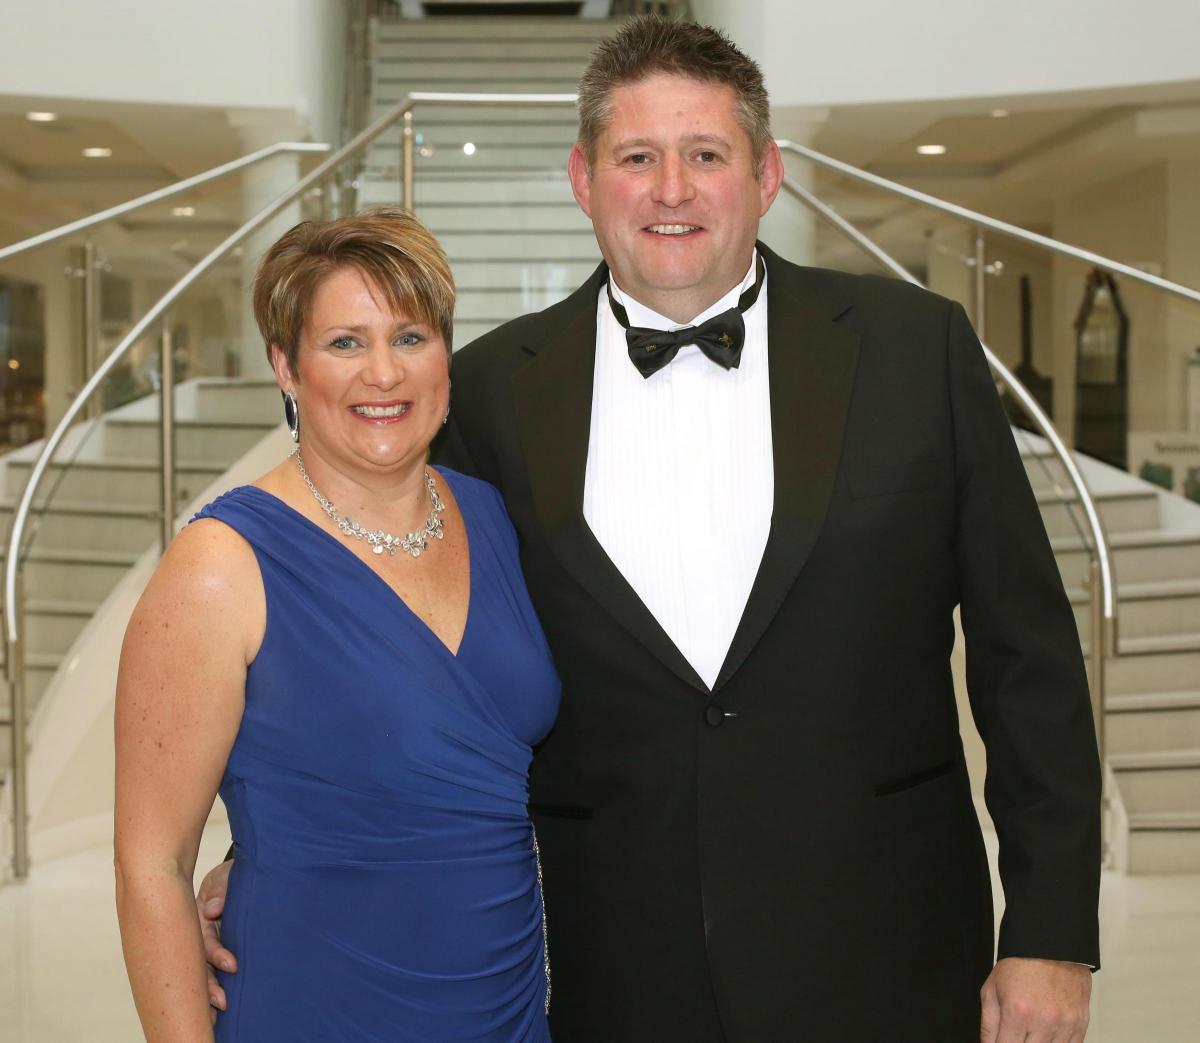 Wensleydale RFC Ball at Tennants, Leyburn.
Kate and David Loughlin.
Picture: Richard Doughty Photography